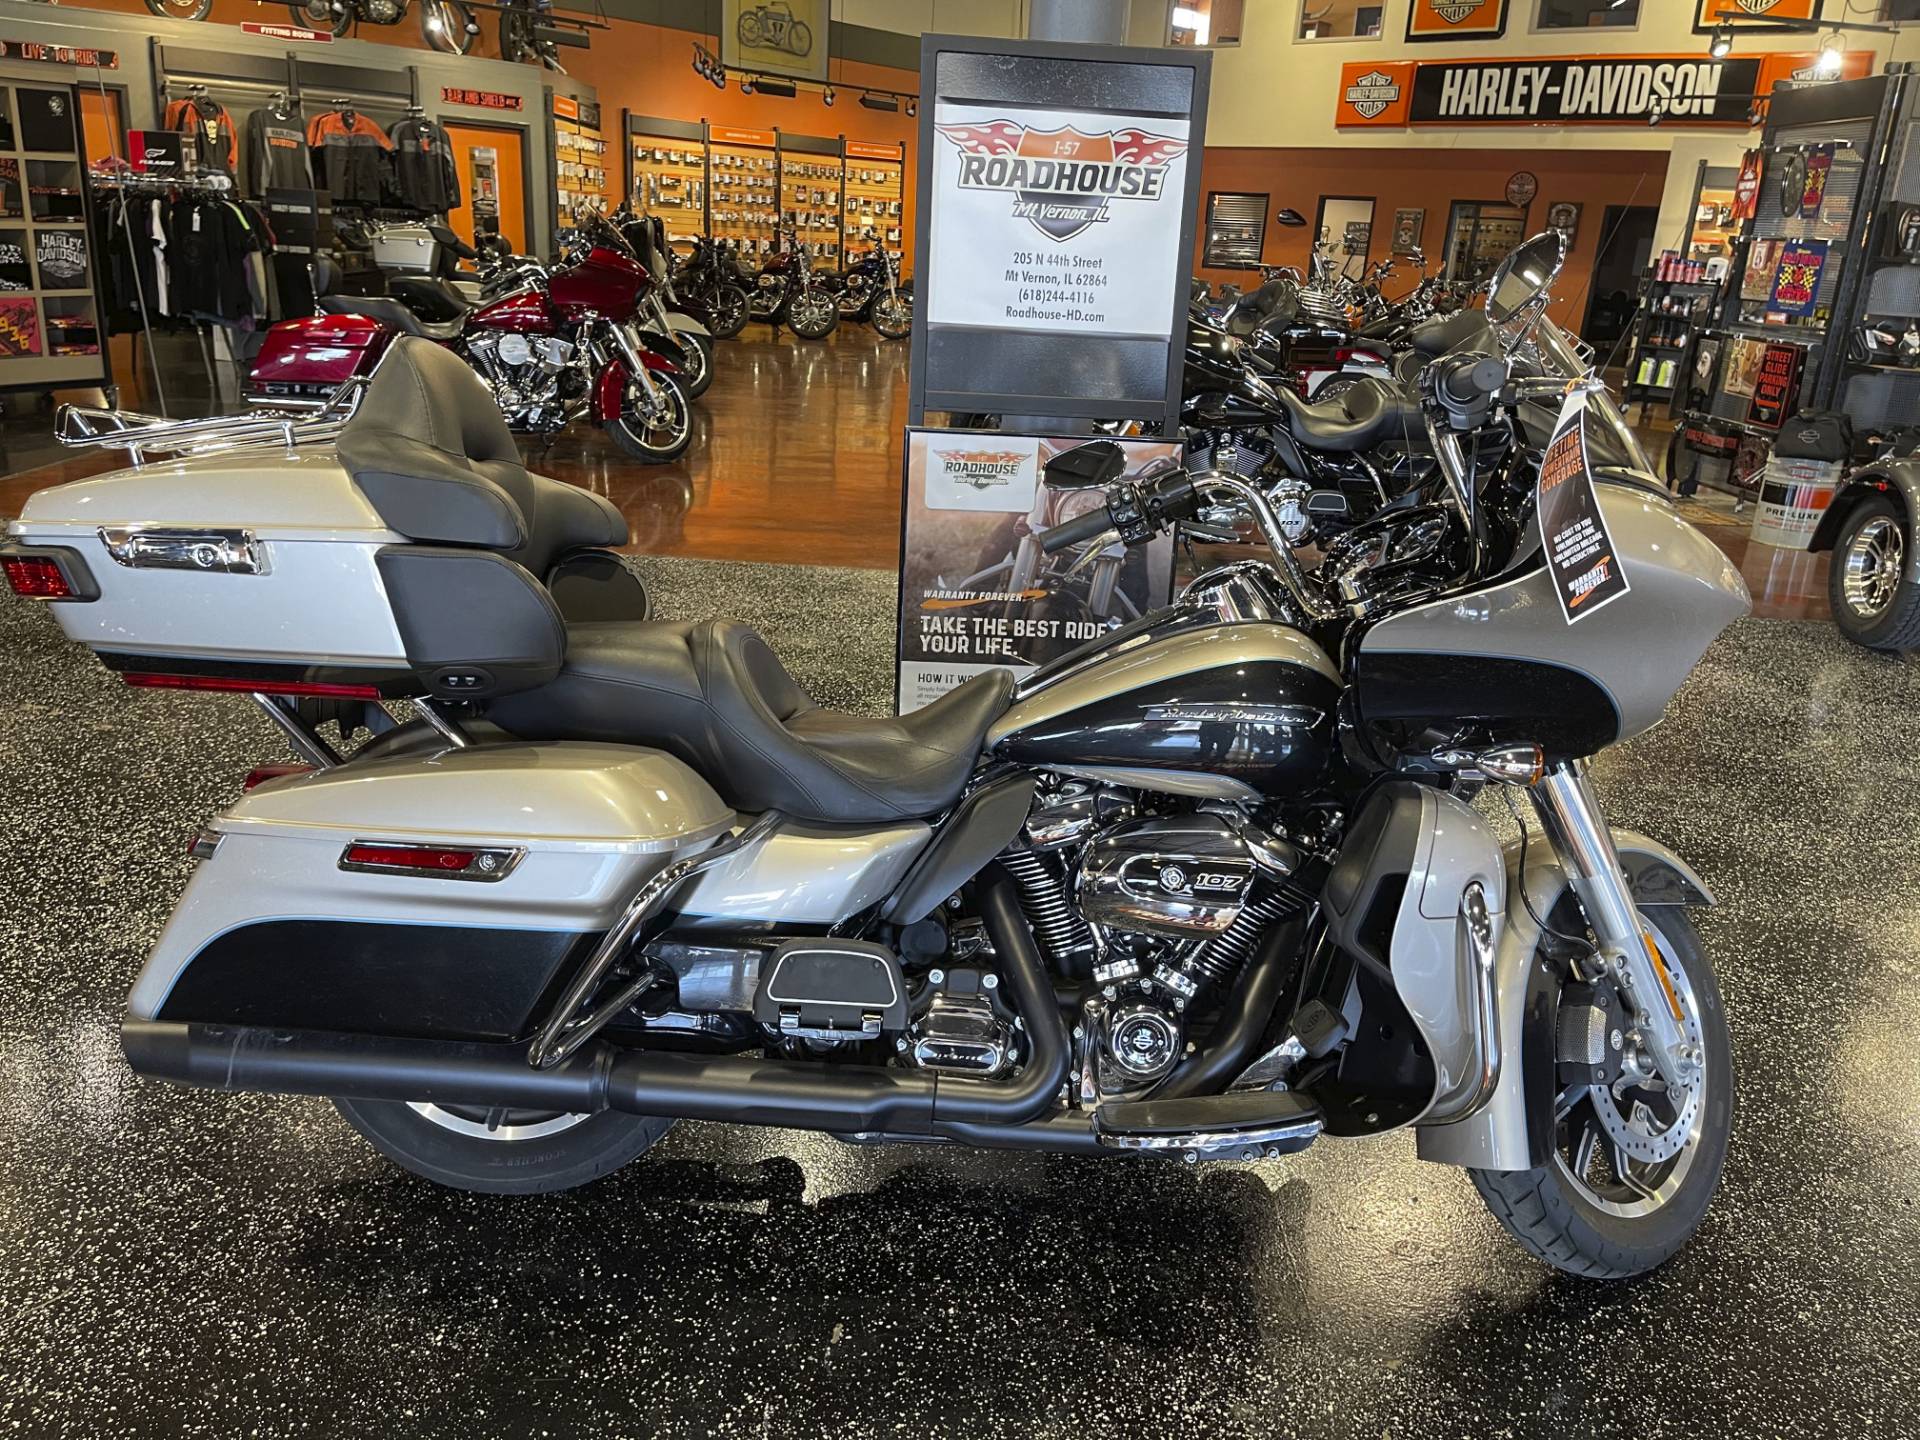 Used 2018 Harley Davidson Road Glide Ultra Silver Fortune Black Tempest Motorcycles In Mount Vernon Il U603119